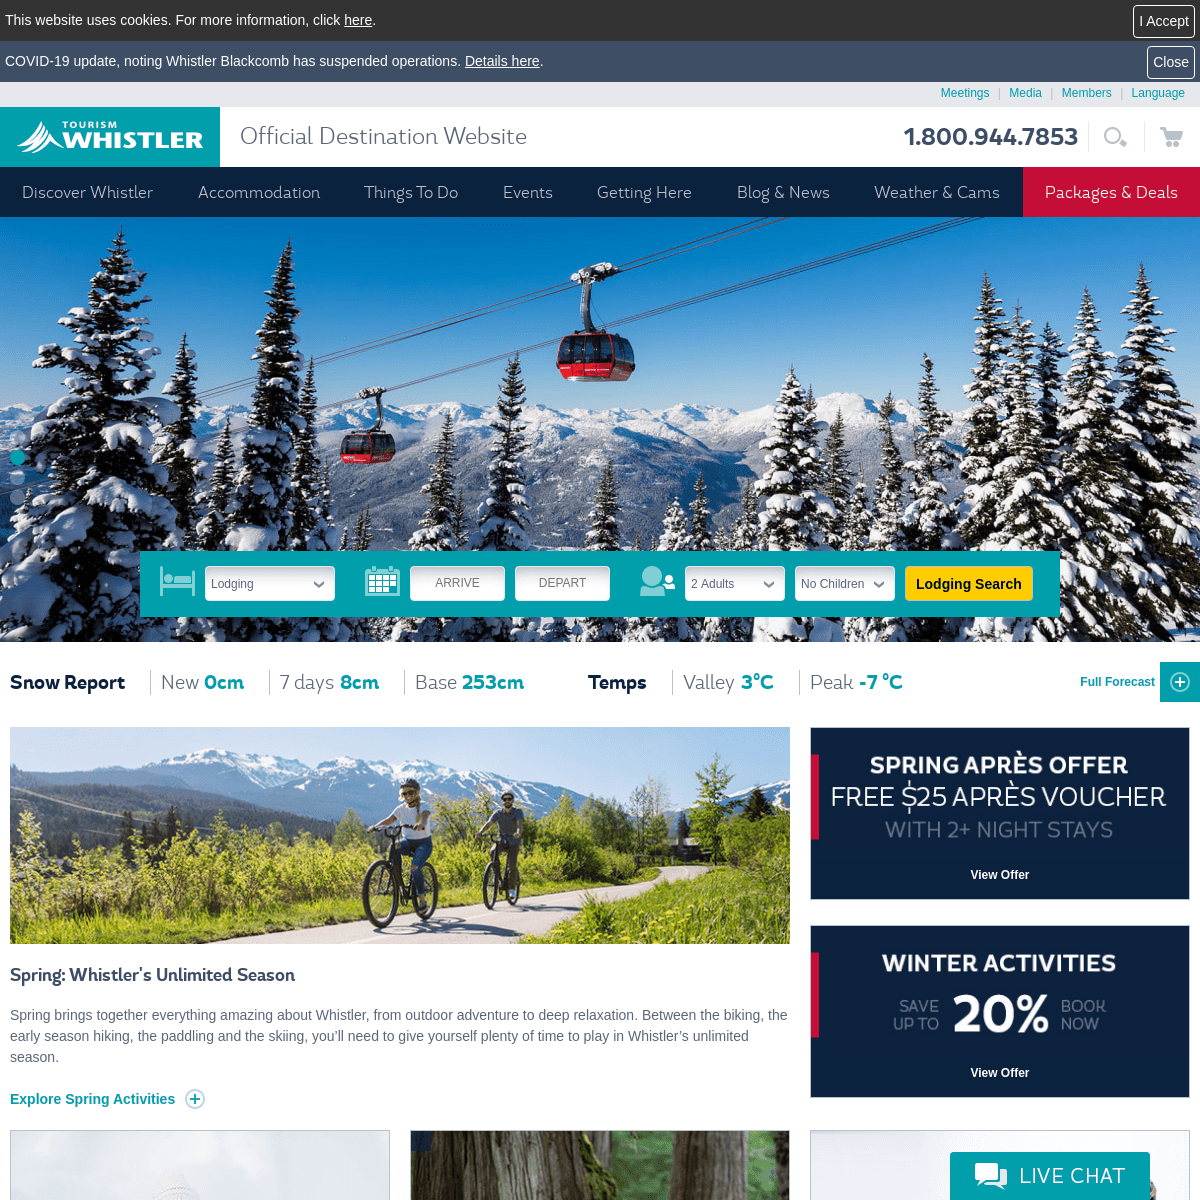 A complete backup of whistler.com